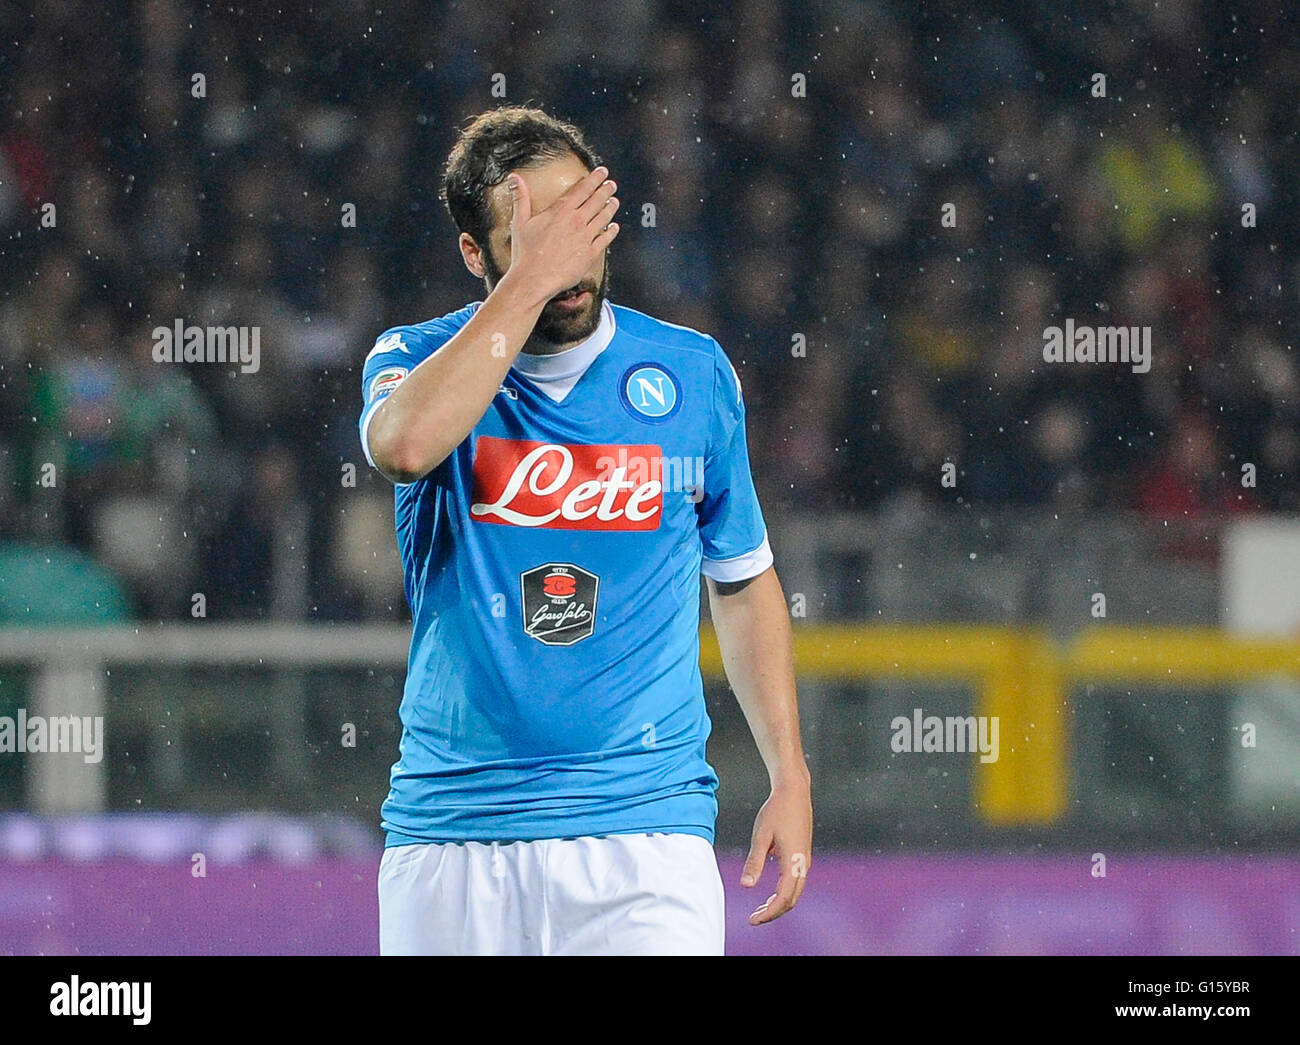 Turin, Italy. 8 may, 2016: Gonzalo Higuain gestures during the Serie A football match between Torino FC and SSC Napoli Stock Photo